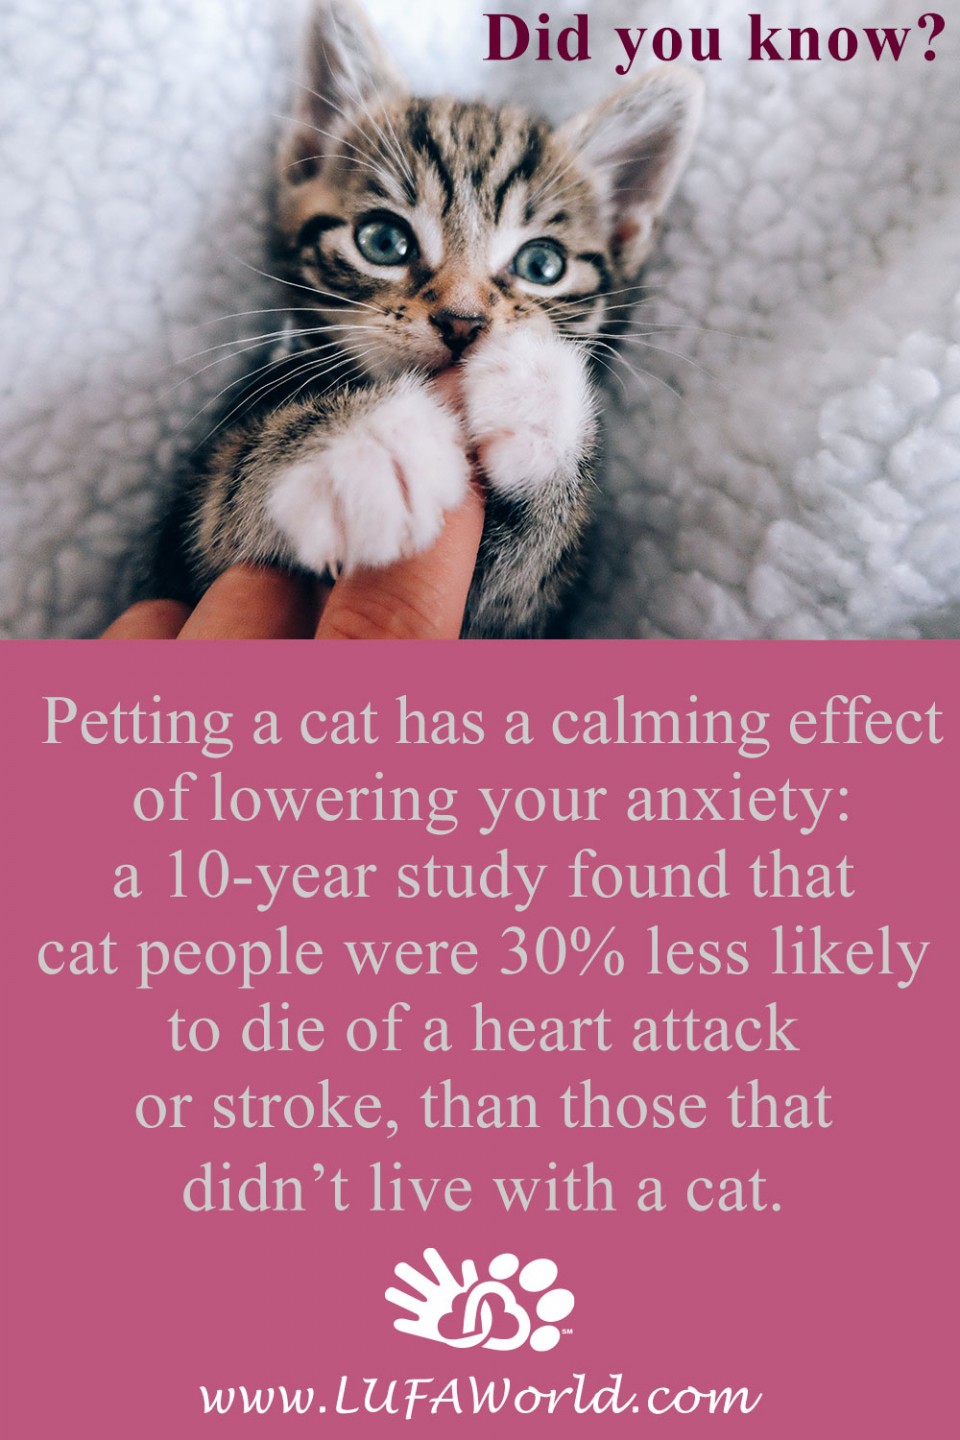 #CatsRule #CatLover  #DidYouKnow  #FunFact #TheMoreYouKnow